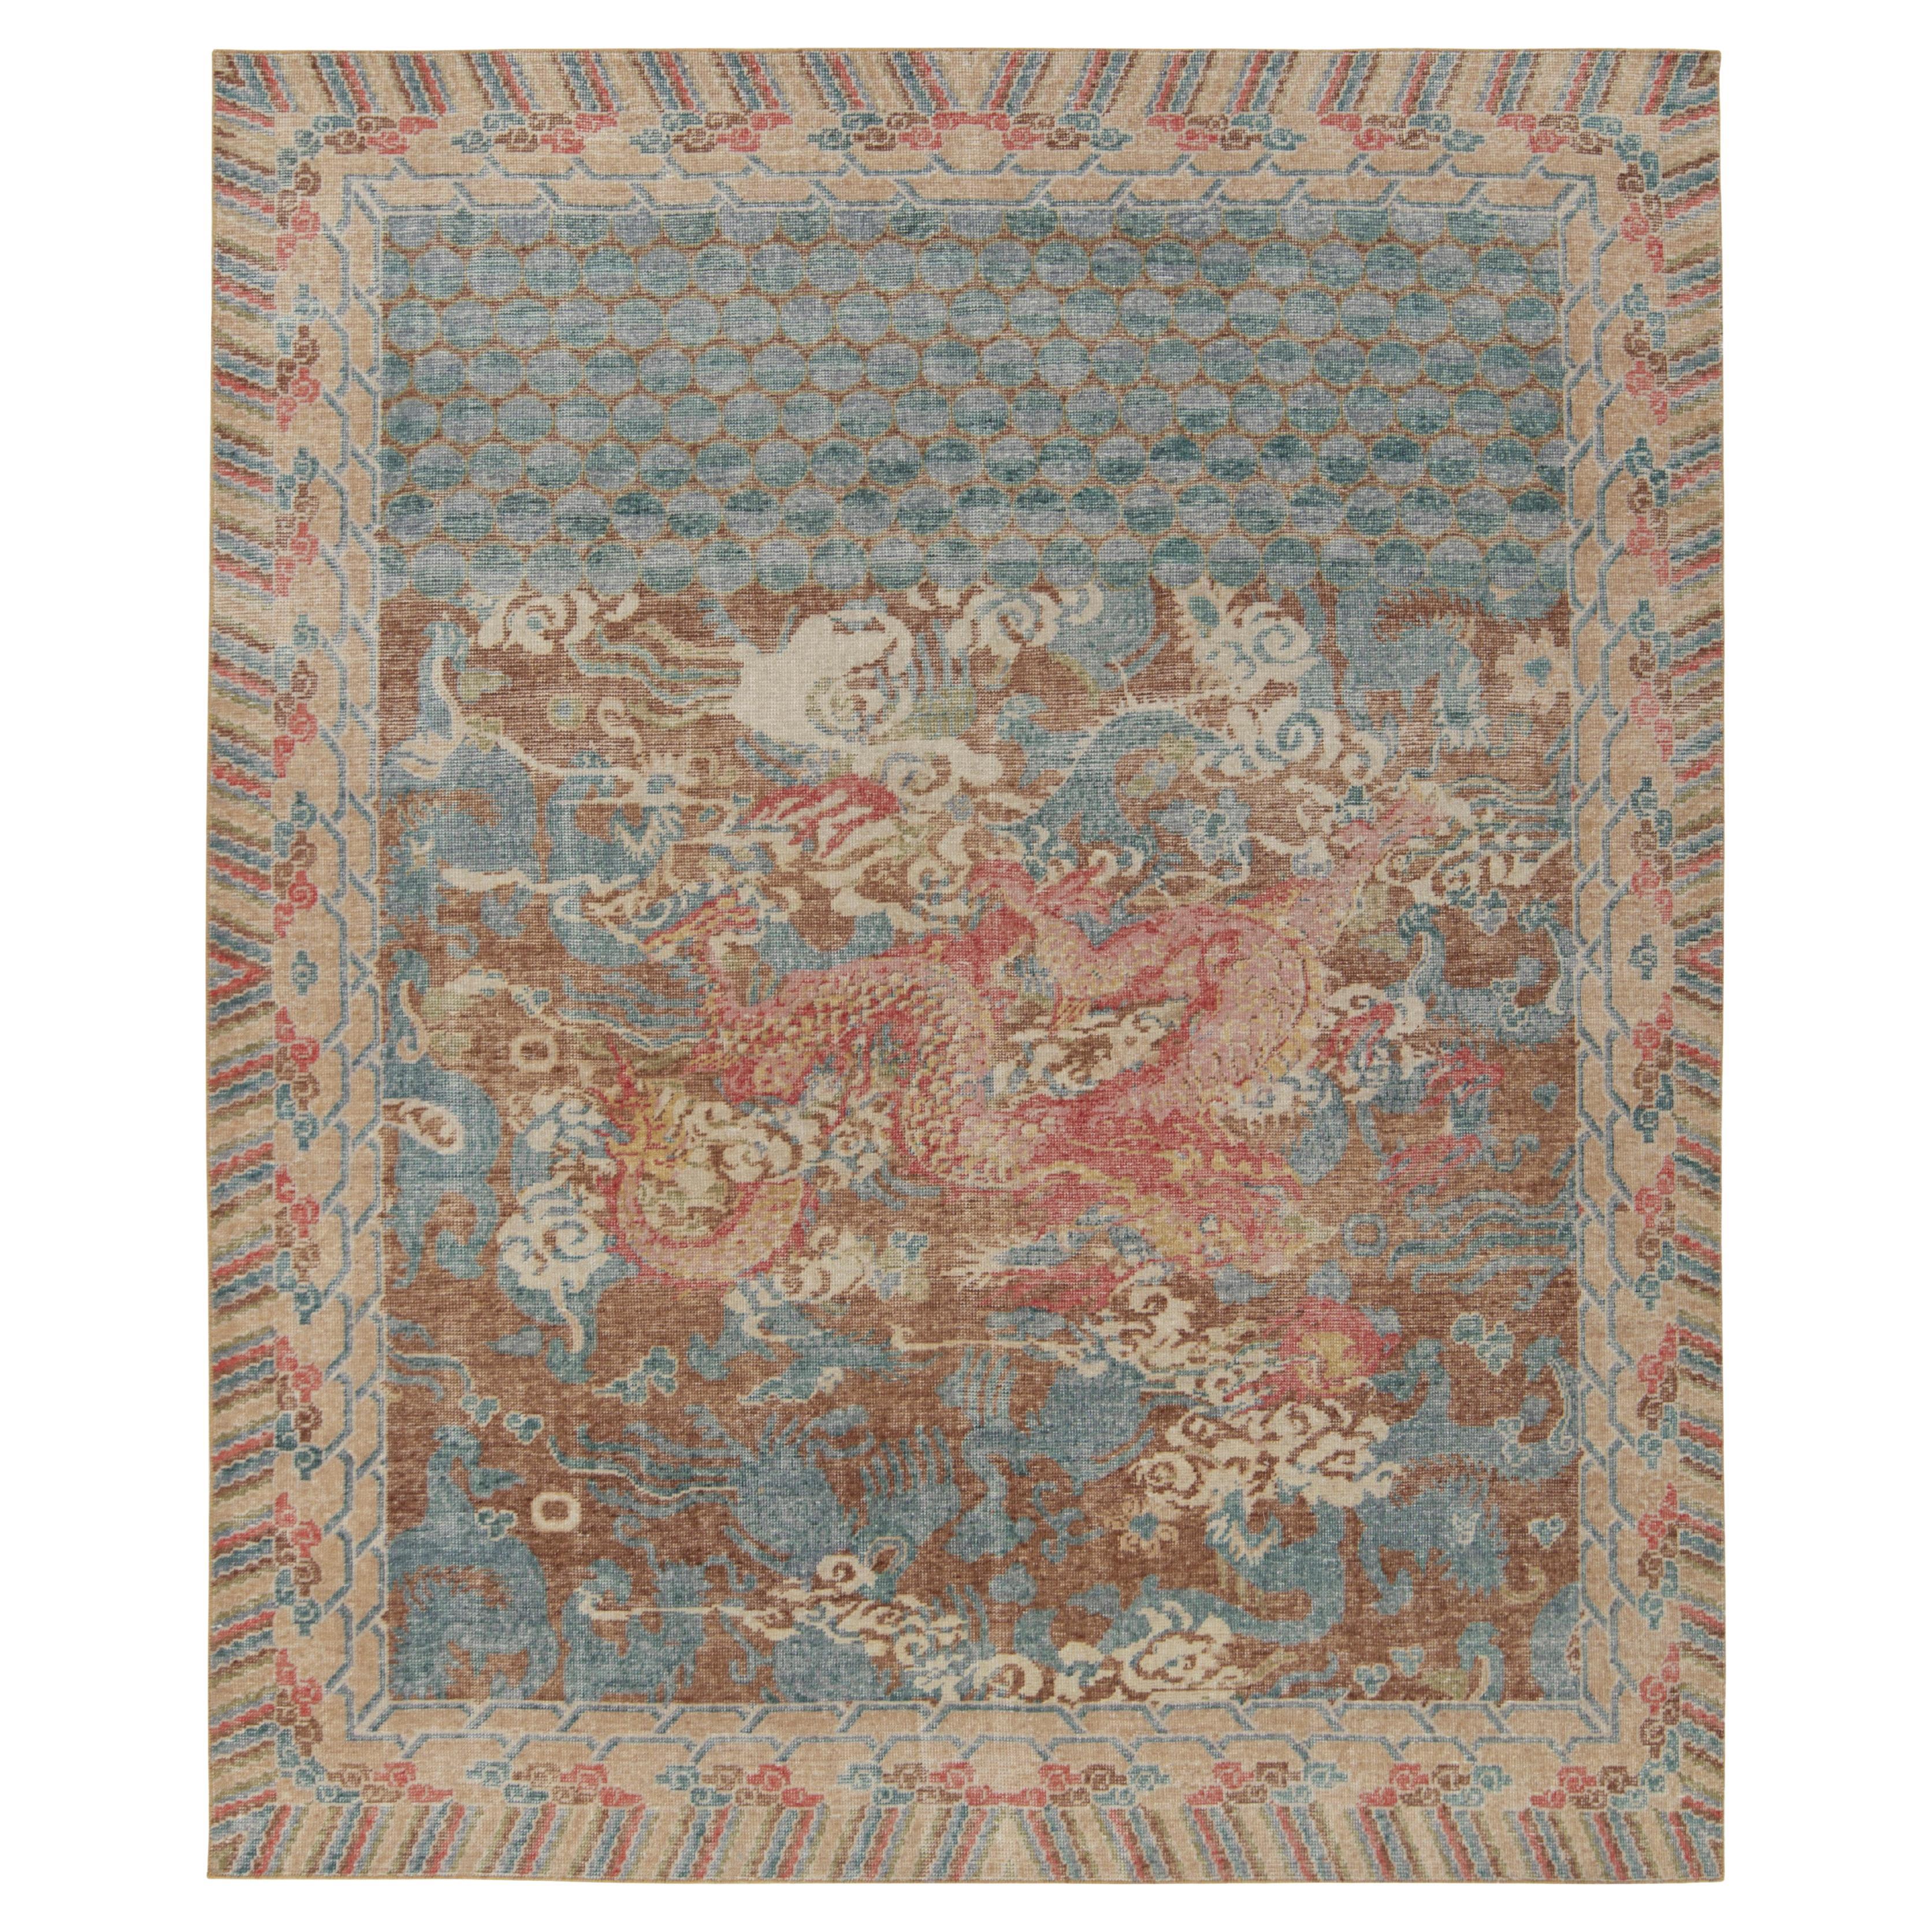 Rug & Kilim's Distressed Style Dragon Rug in Brown, Blue, Red Pictorials